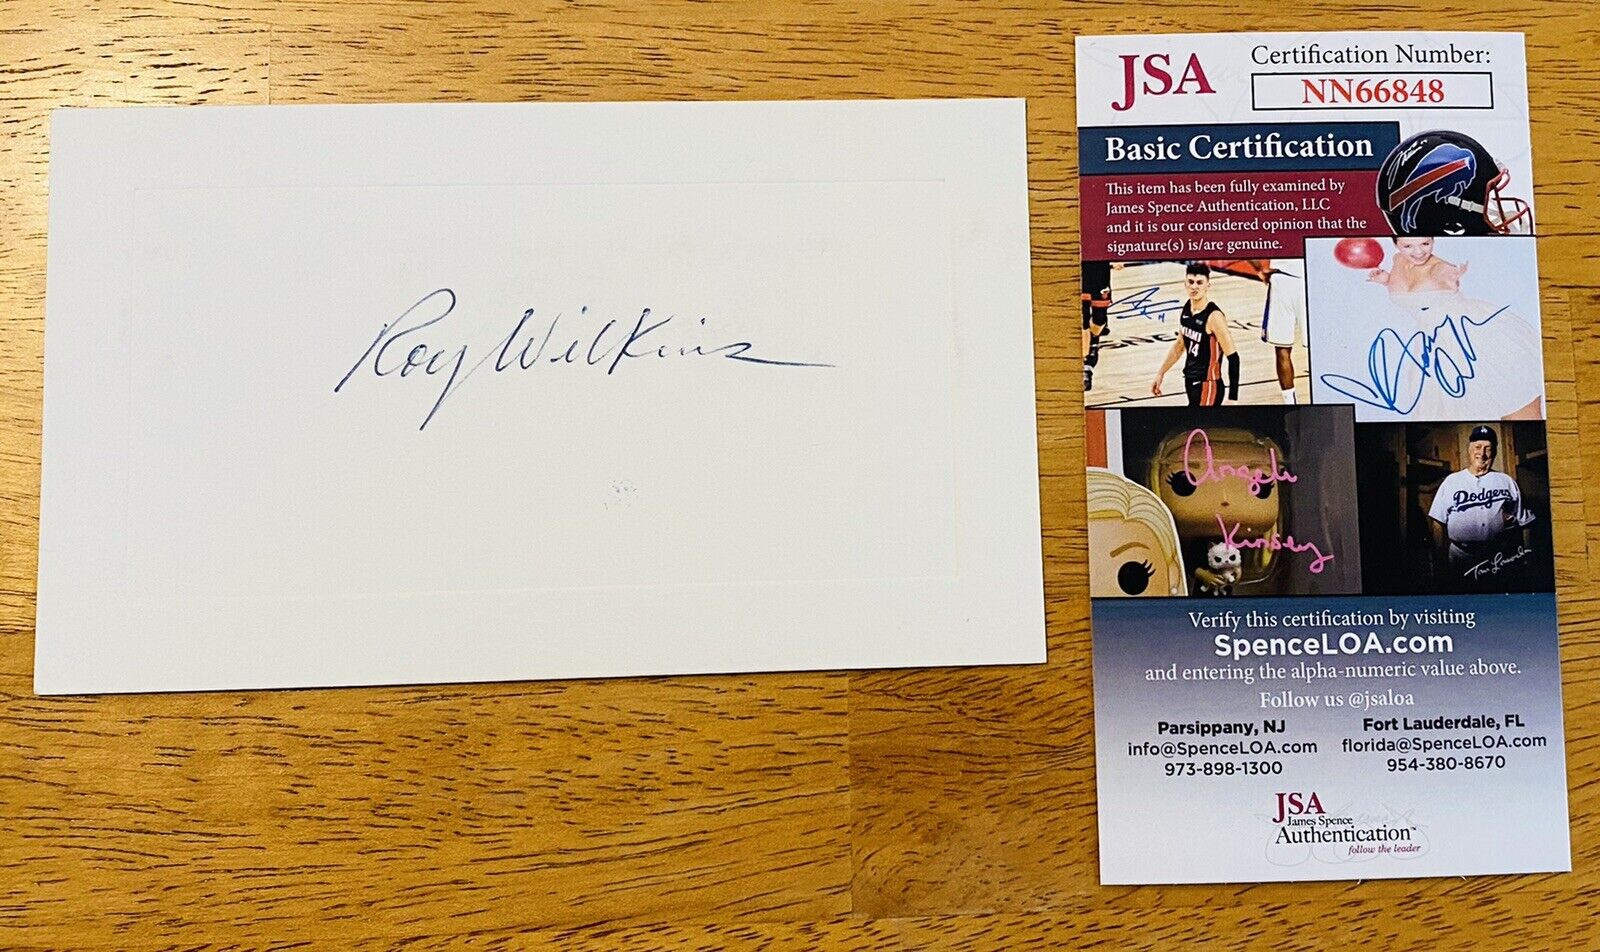 Roy Wilkins Signed Autographed 3.5 x 6 Card JSA Cert NAACP Civil Rights Leader